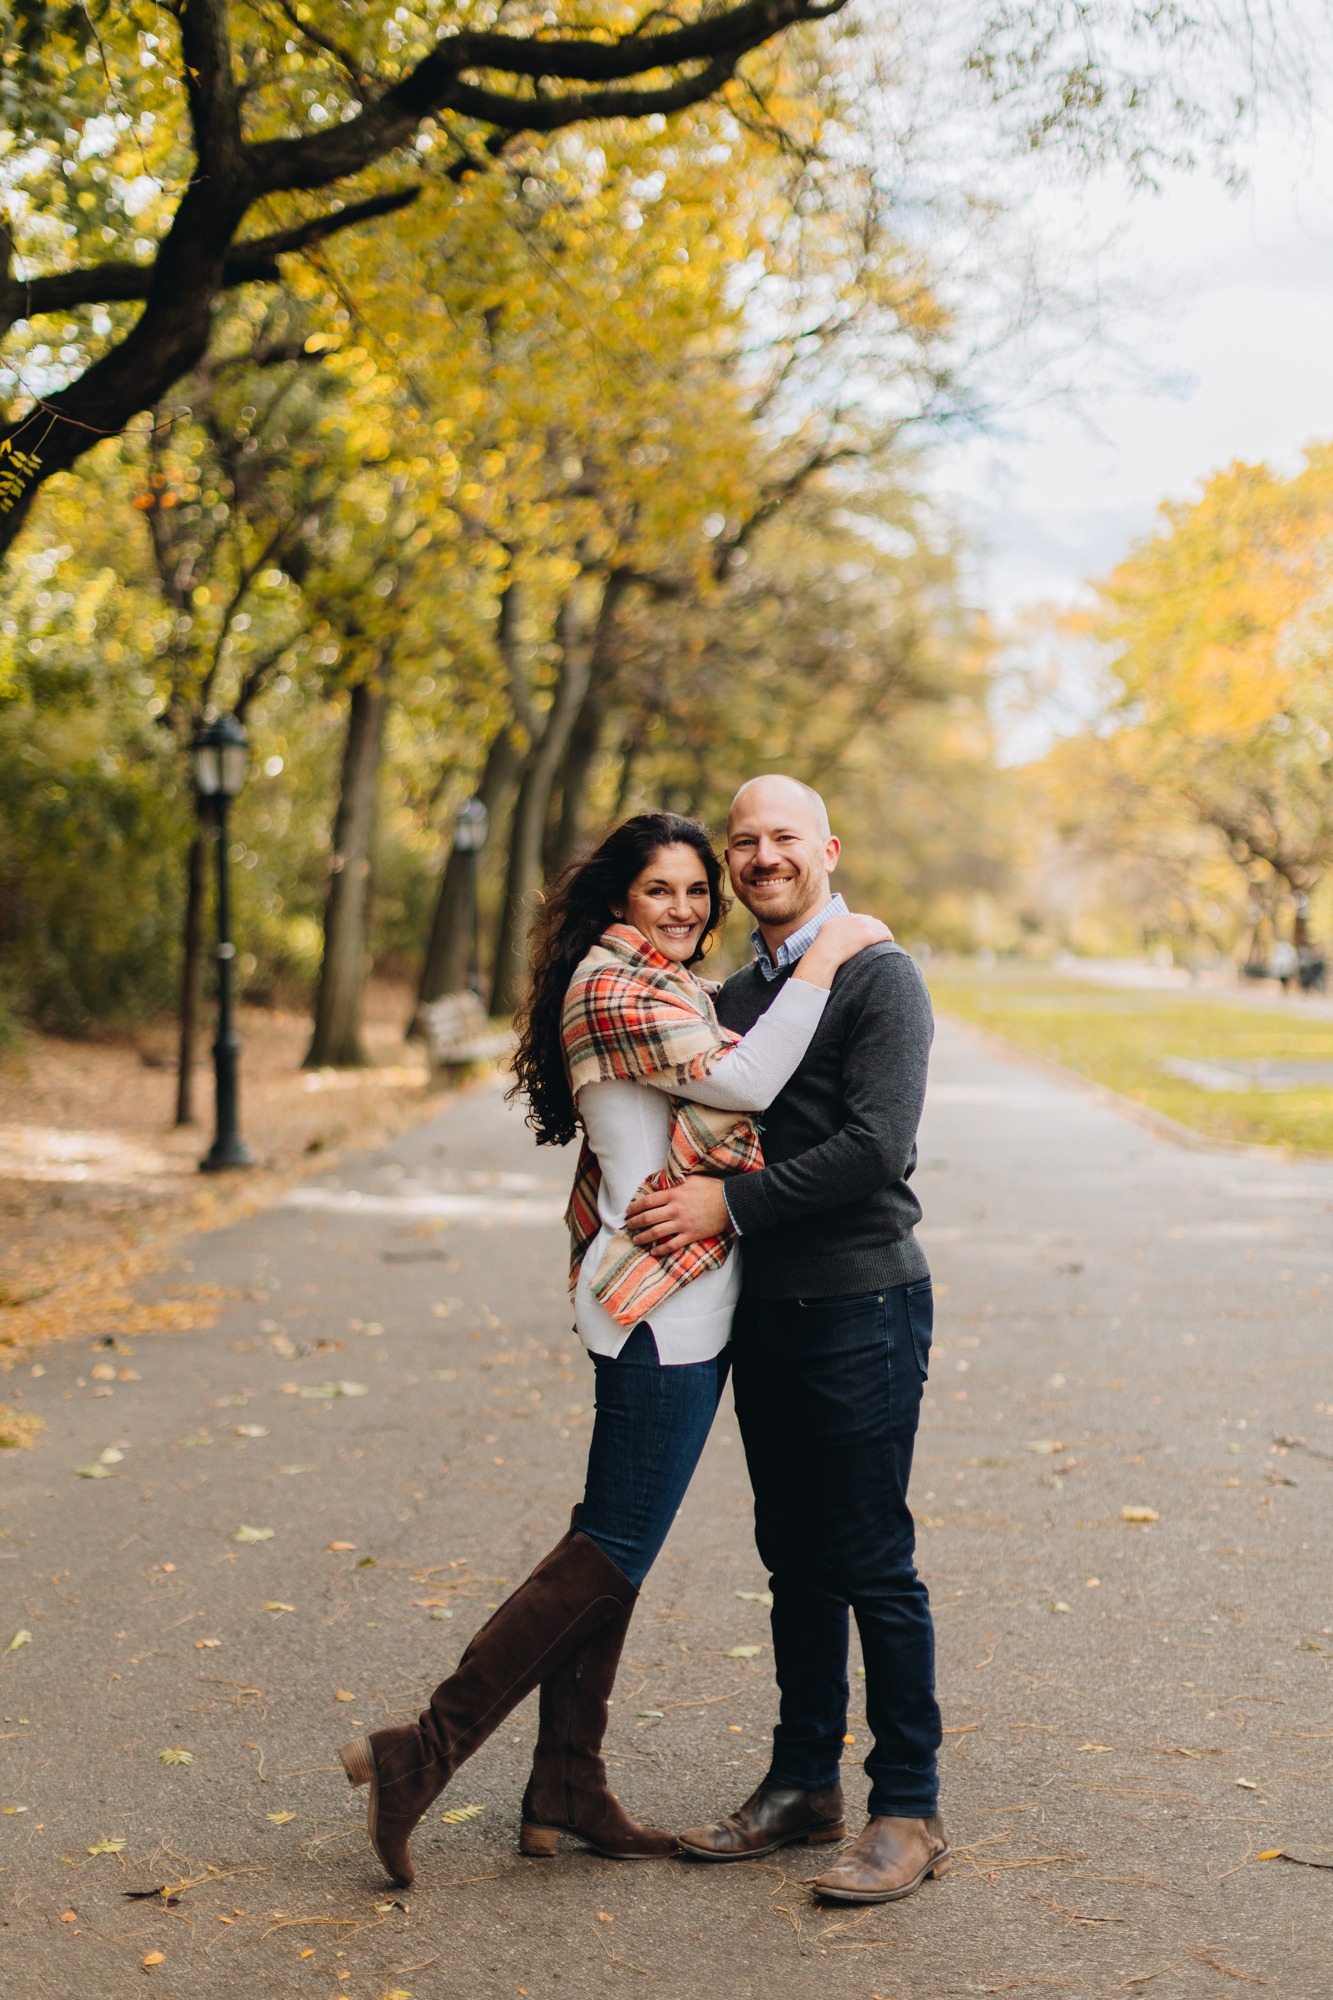 Cheerful Fall Riverside Park Engagement Photography